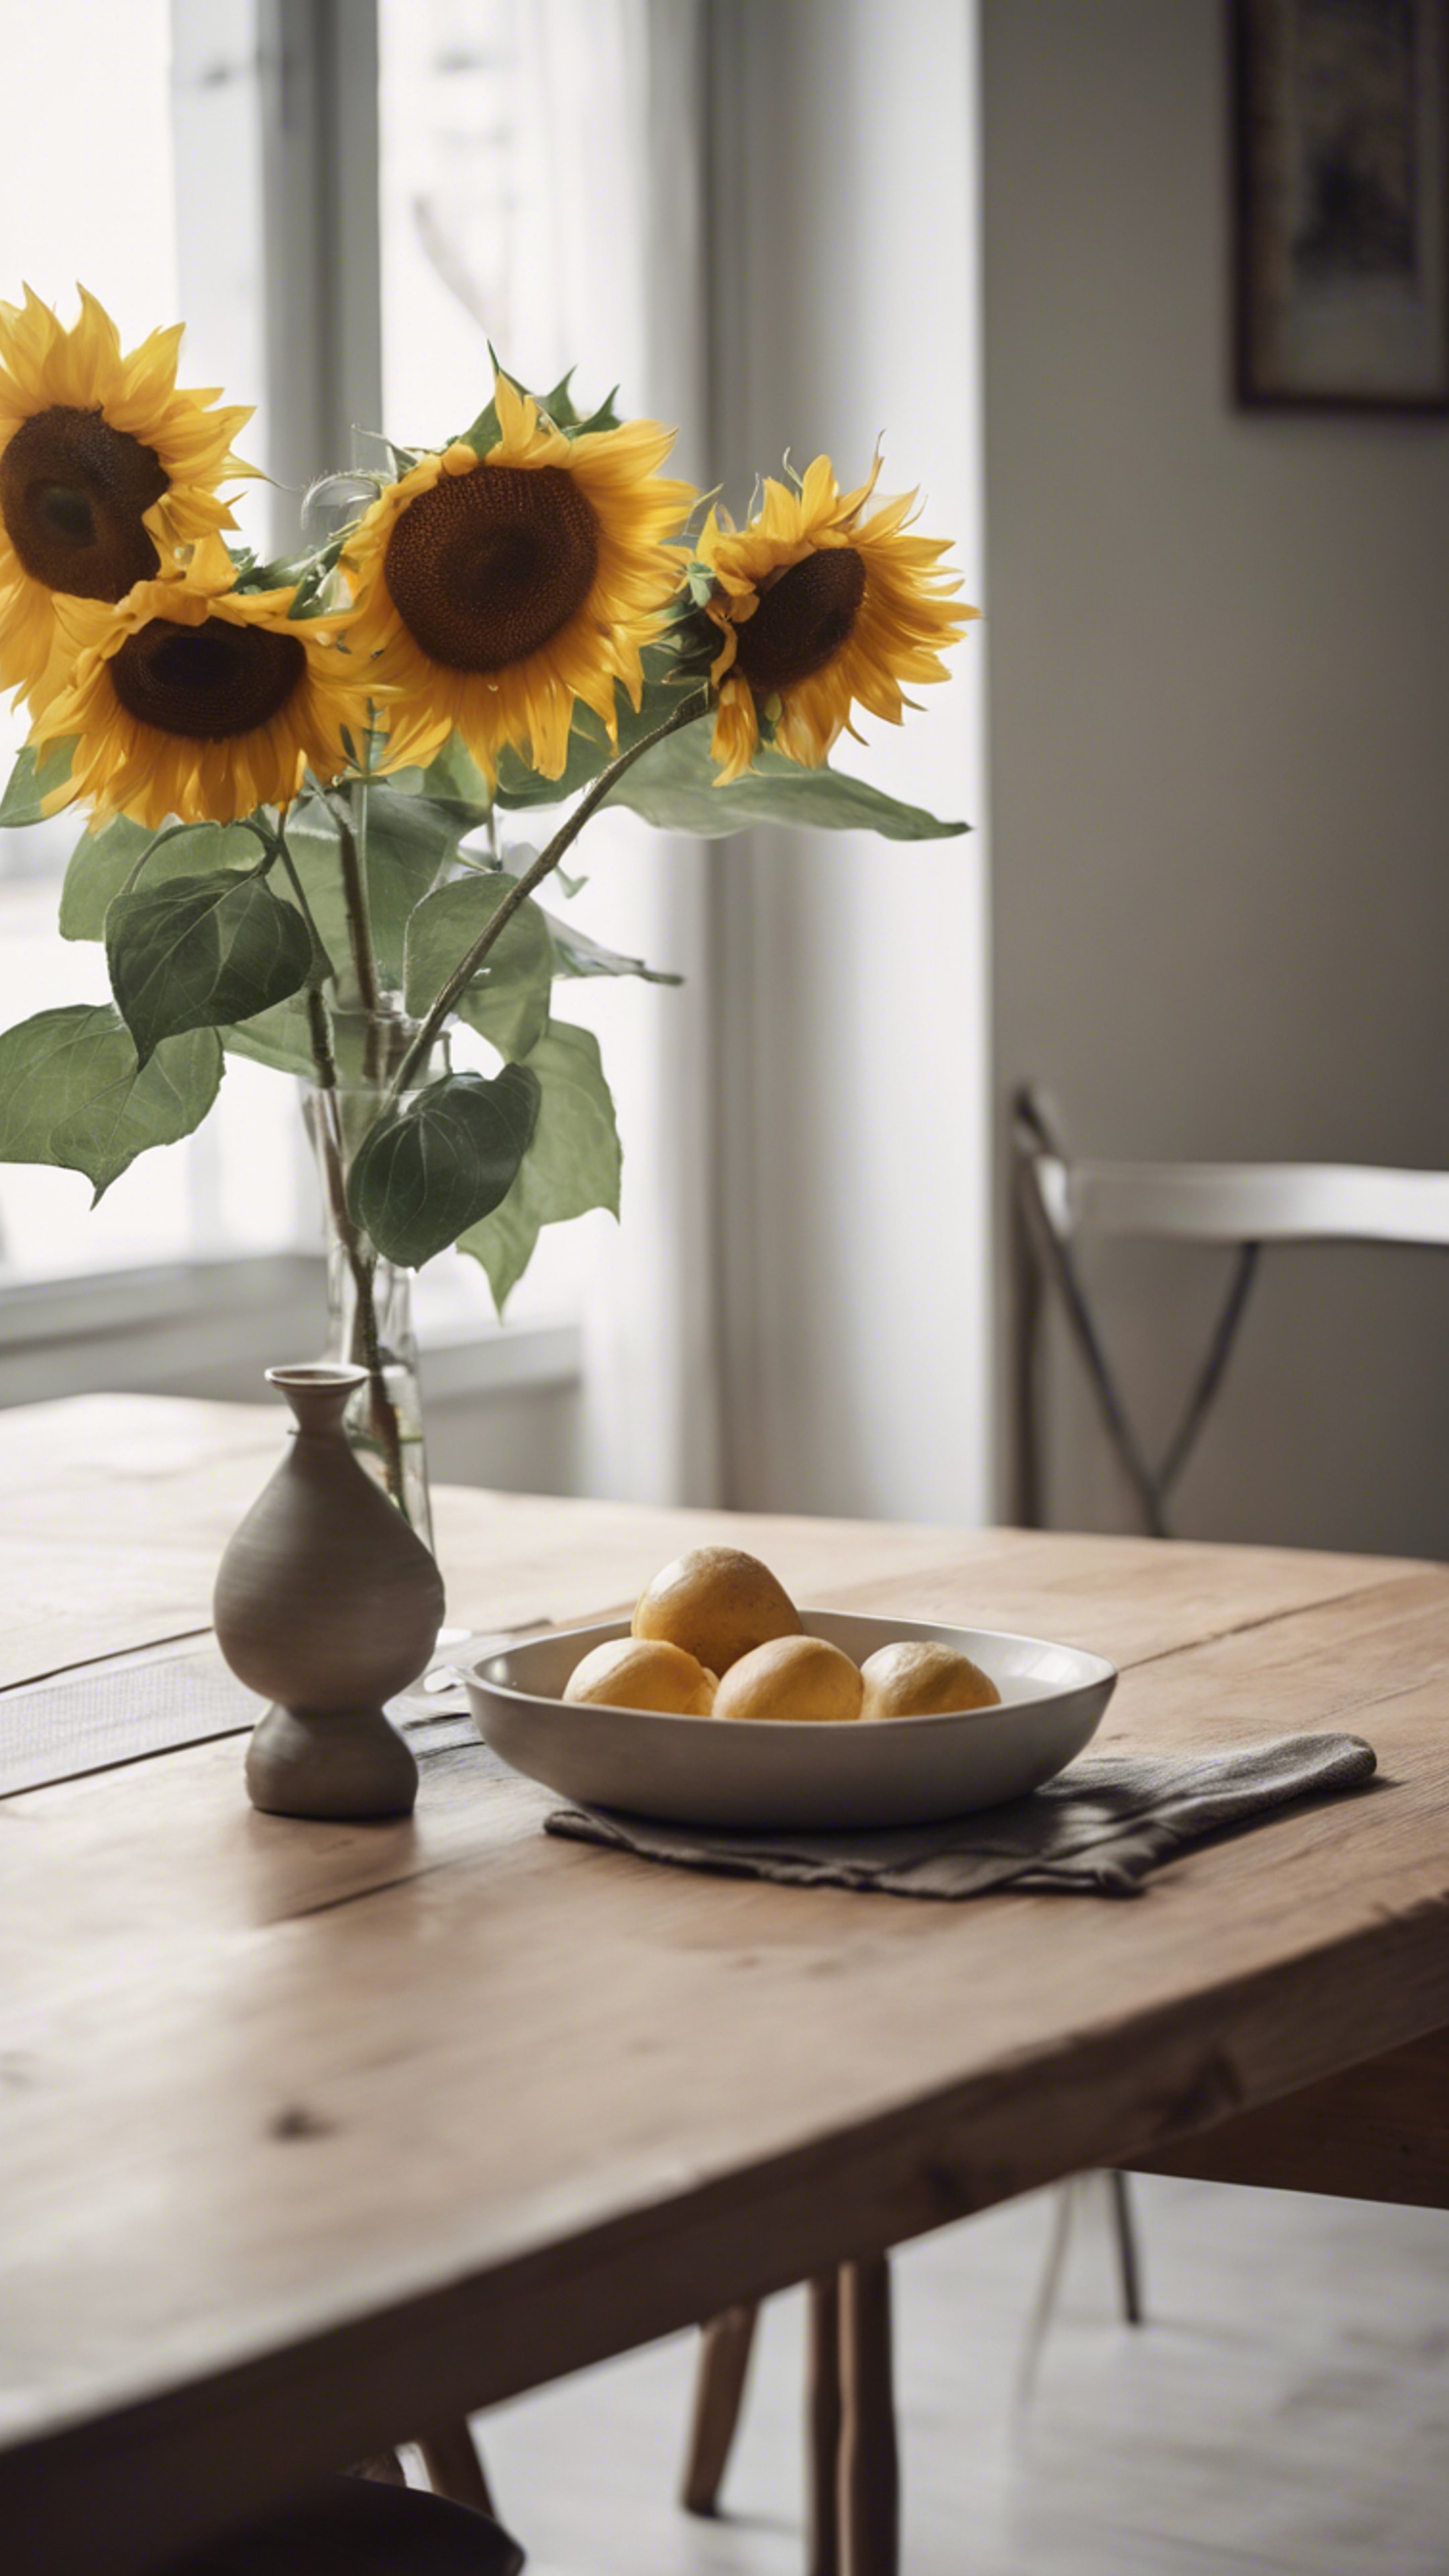 A minimalist dining area with a wooden table, set with simple china and a vase of sunflowers. Behang[7db5290c1b5a4d25ba08]